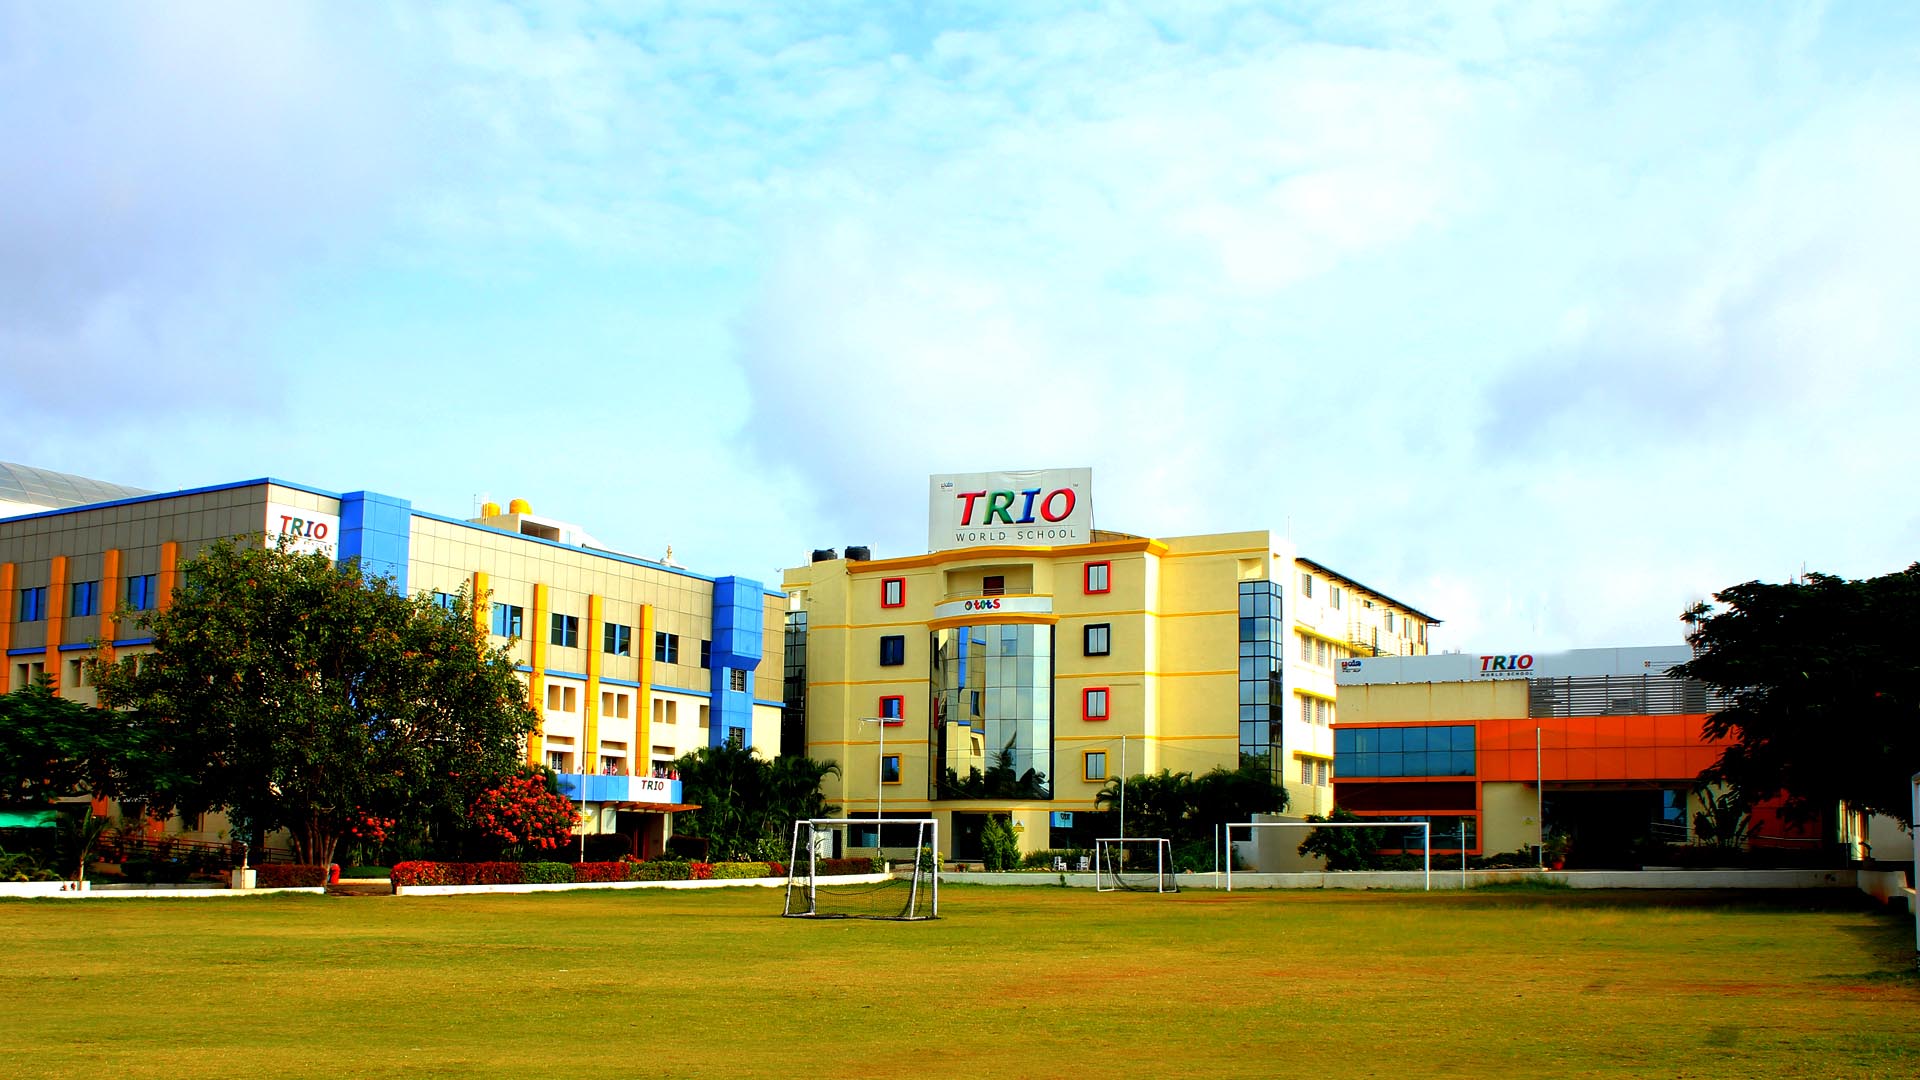 TRIO World School announces franchise opportunities for their Pre-school and K -12